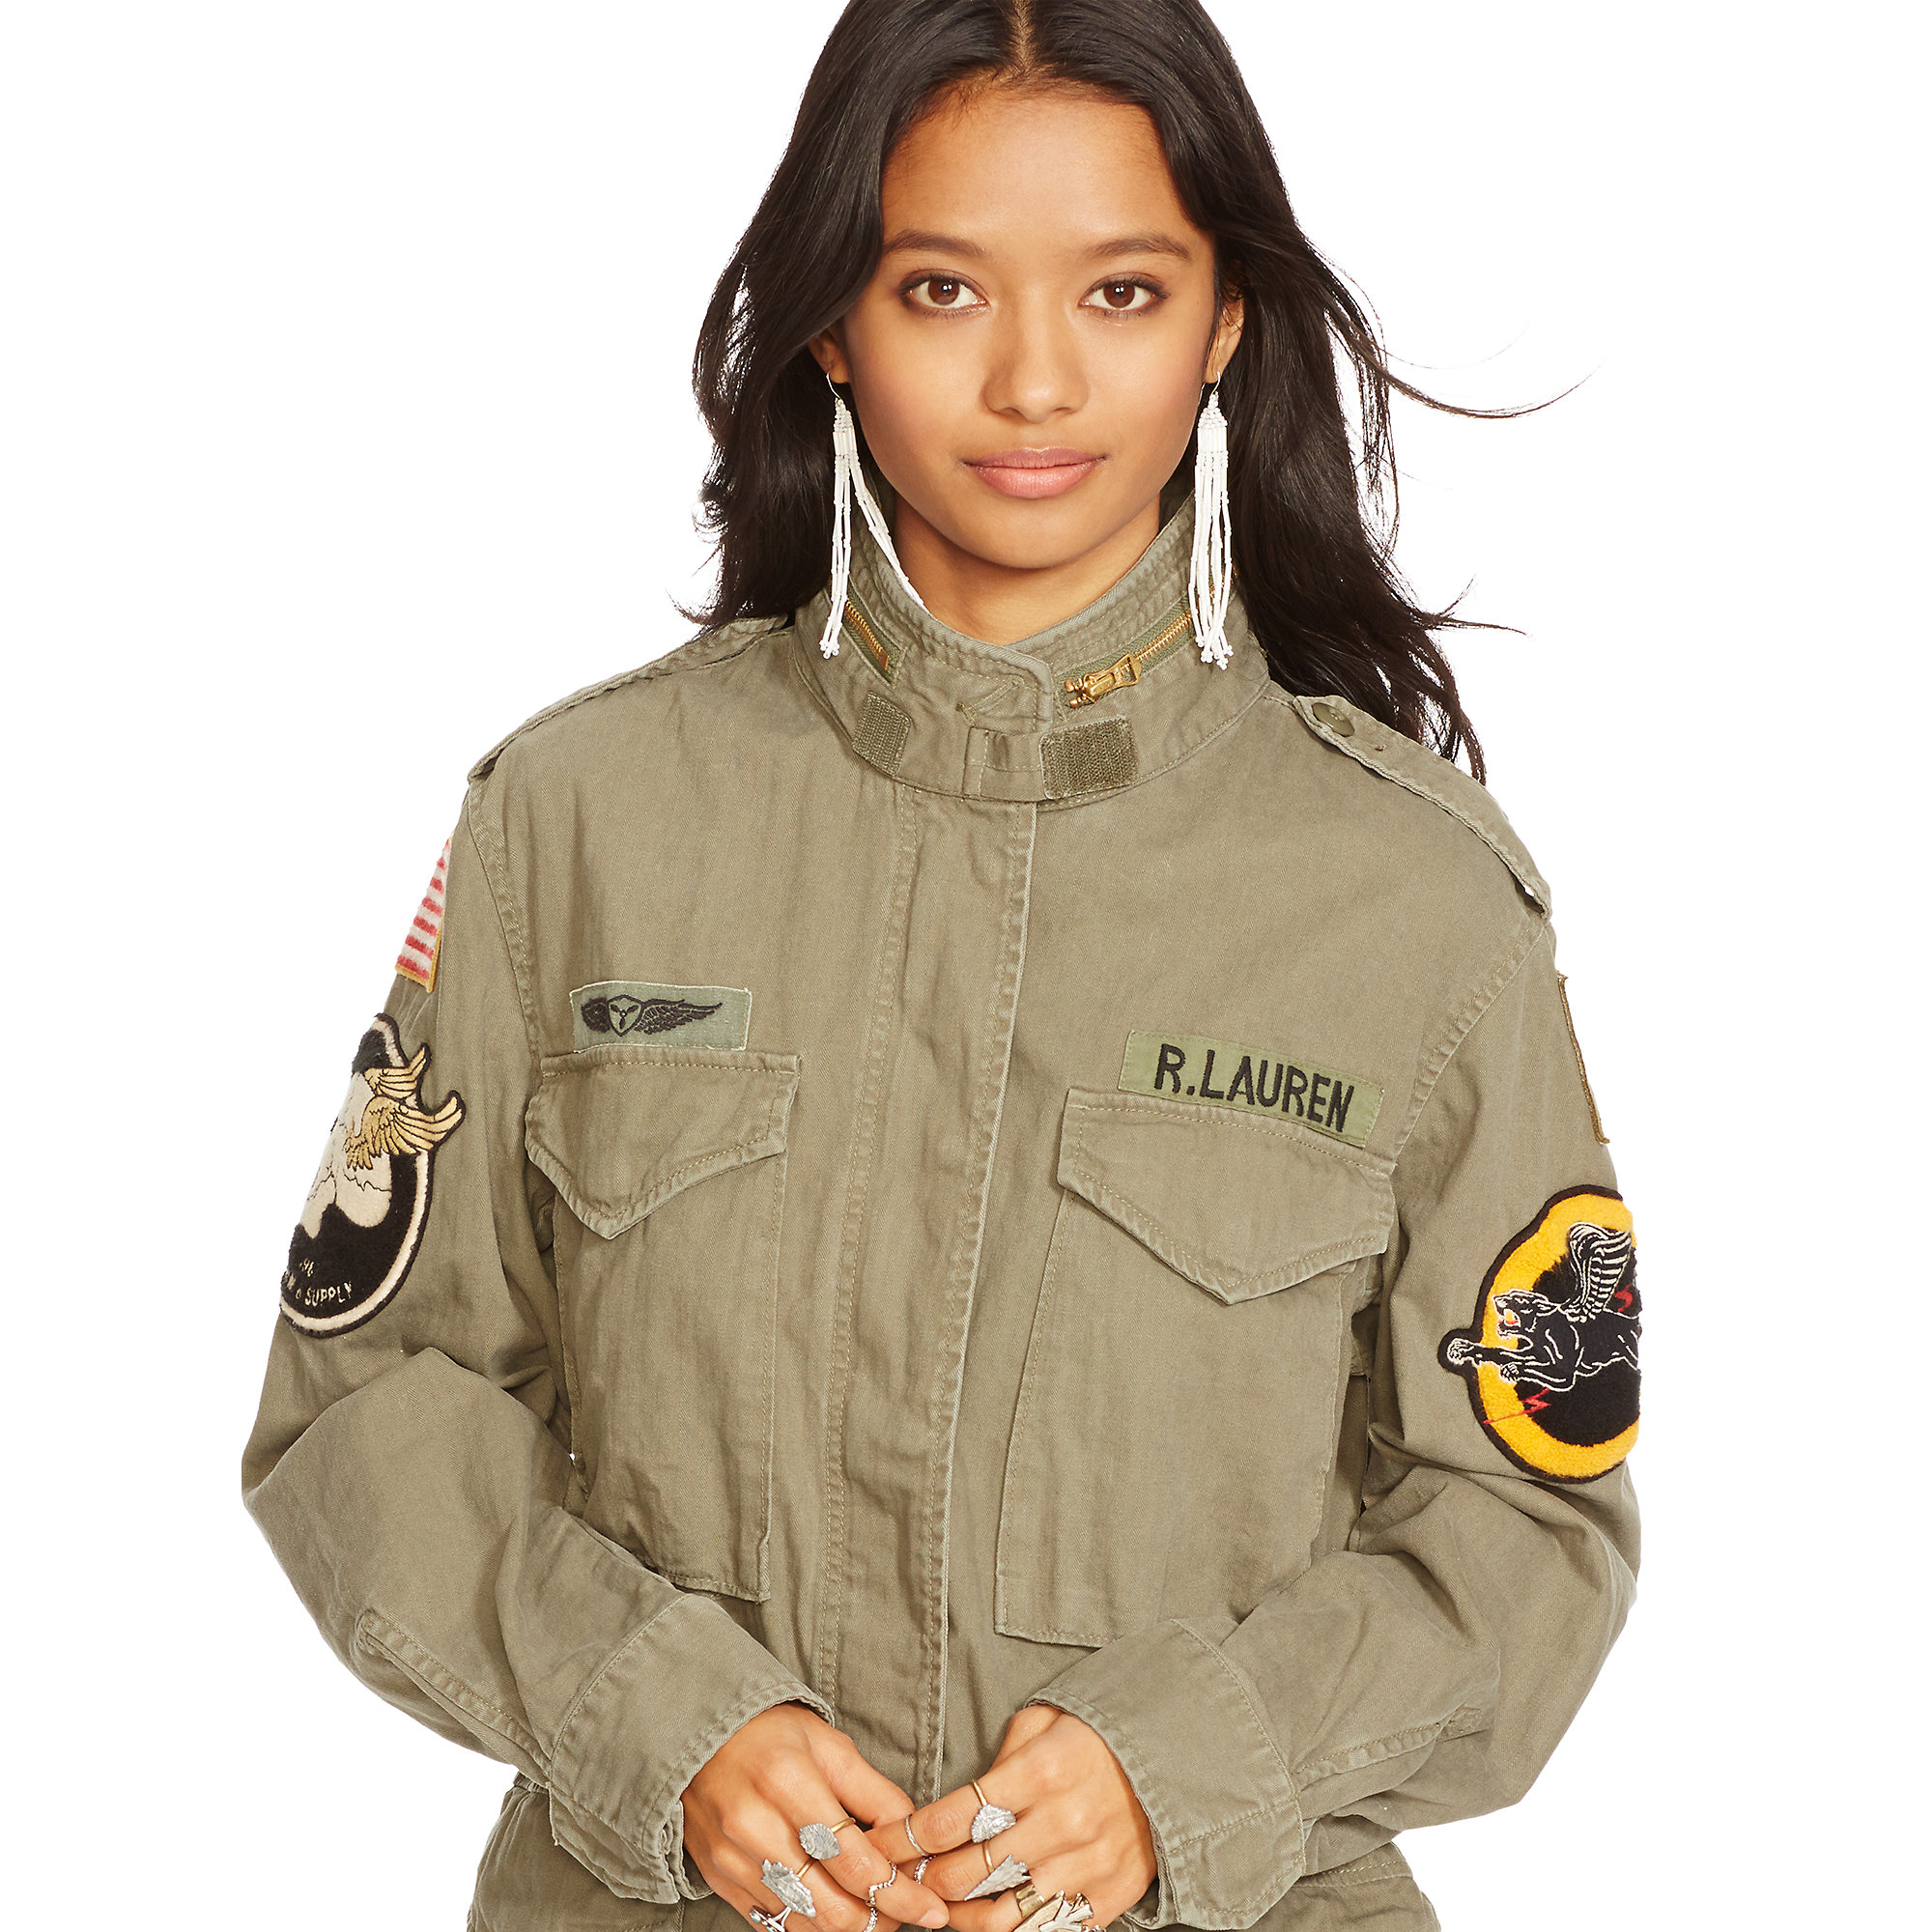 Ralph Lauren Army Jacket With Patches Cheapest Sales, Save 41% |  jlcatj.gob.mx